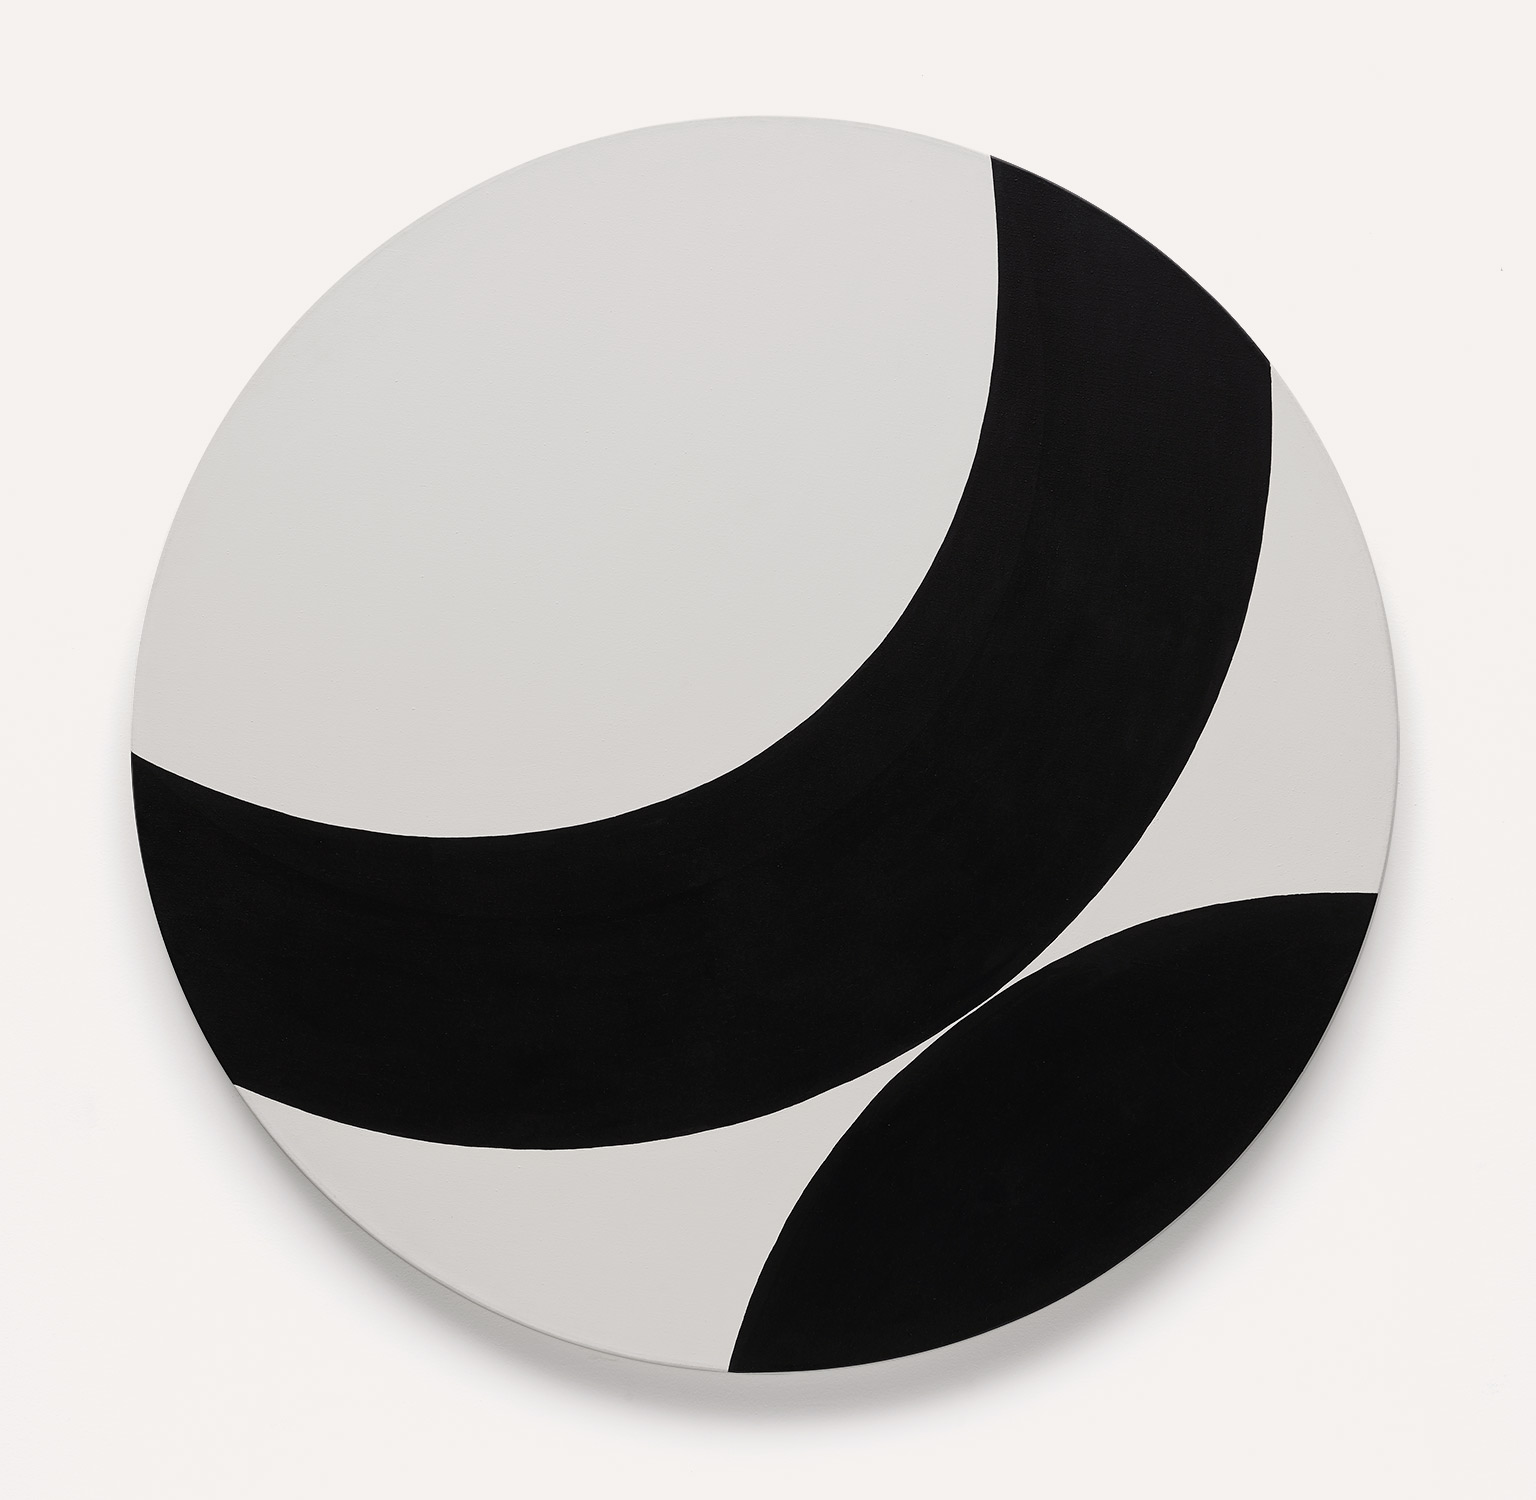 Round 'tondo' painting, white canvas with a very thick outline of another black circle intersecting the frame and yet another black circle just barely touching it. Overall feel is circles touching cropped by a circle.